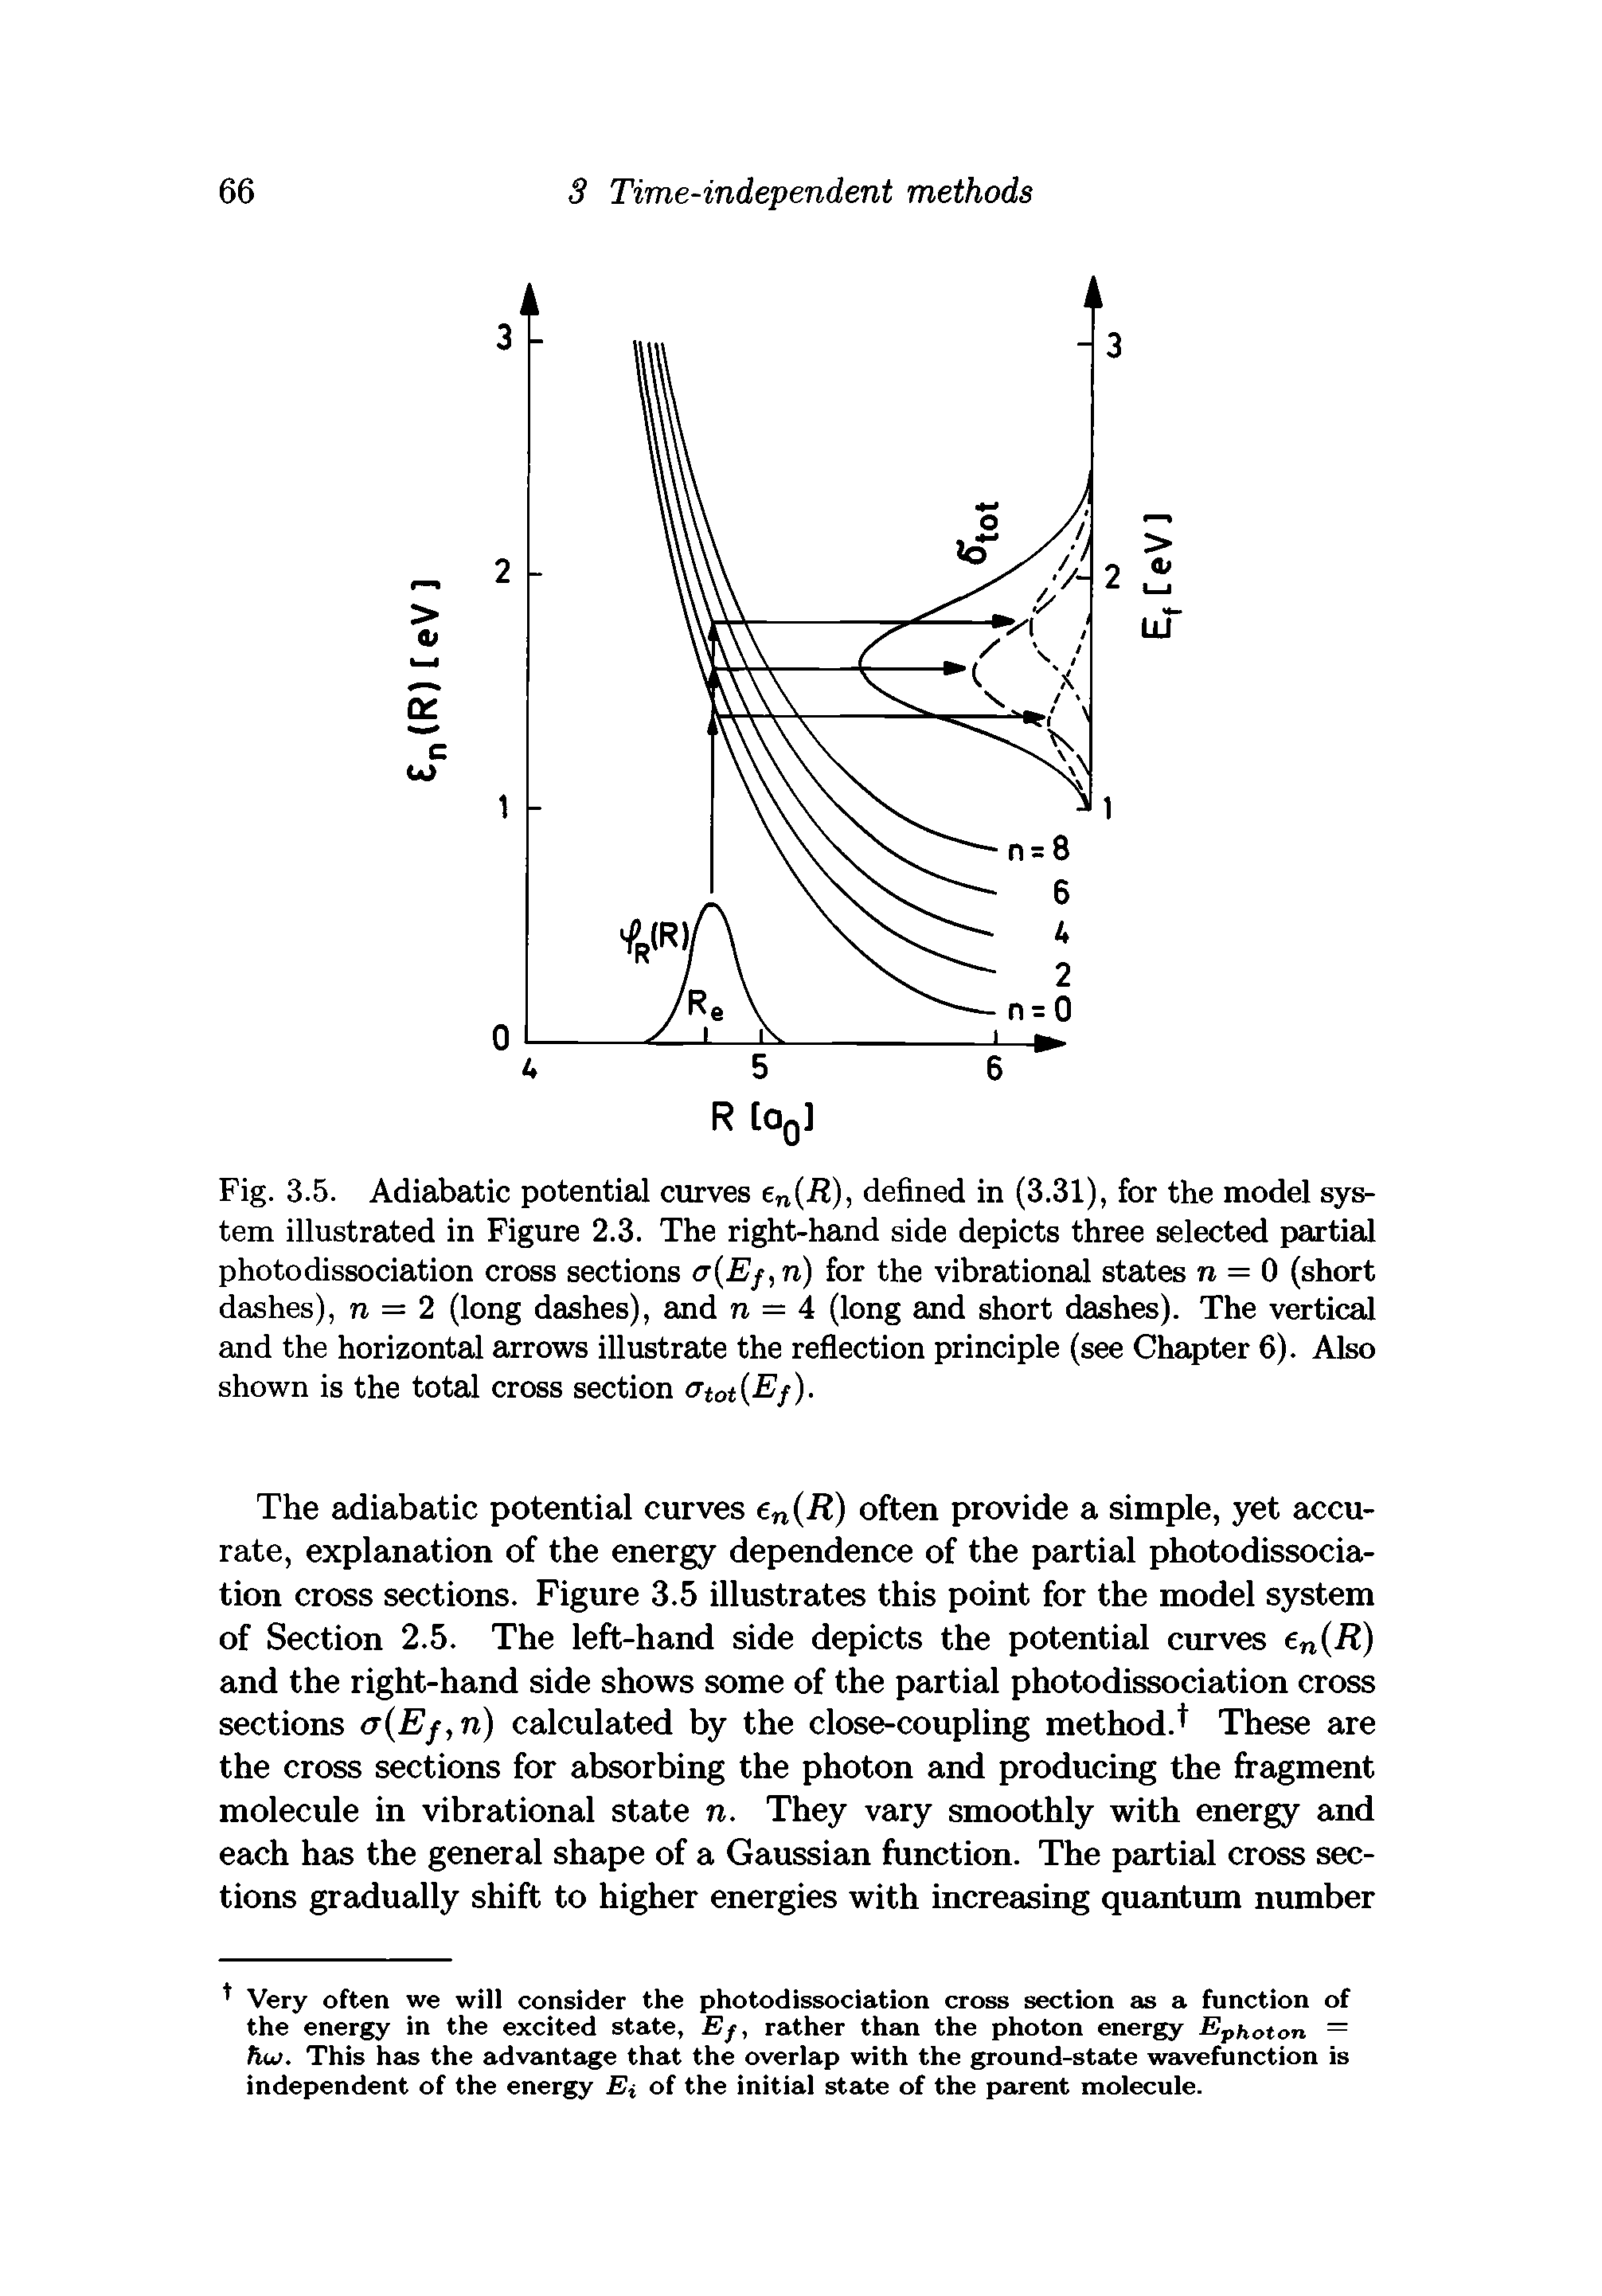 Fig. 3.5. Adiabatic potential curves en(R), defined in (3.31), for the model system illustrated in Figure 2.3. The right-hand side depicts three selected partial photo dissociation cross sections cr(Ef,n) for the vibrational states n = 0 (short dashes), n = 2 (long dashes), and n = 4 (long and short dashes). The vertical and the horizontal arrows illustrate the reflection principle (see Chapter 6). Also shown is the total cross section (Jtot Ef) ...